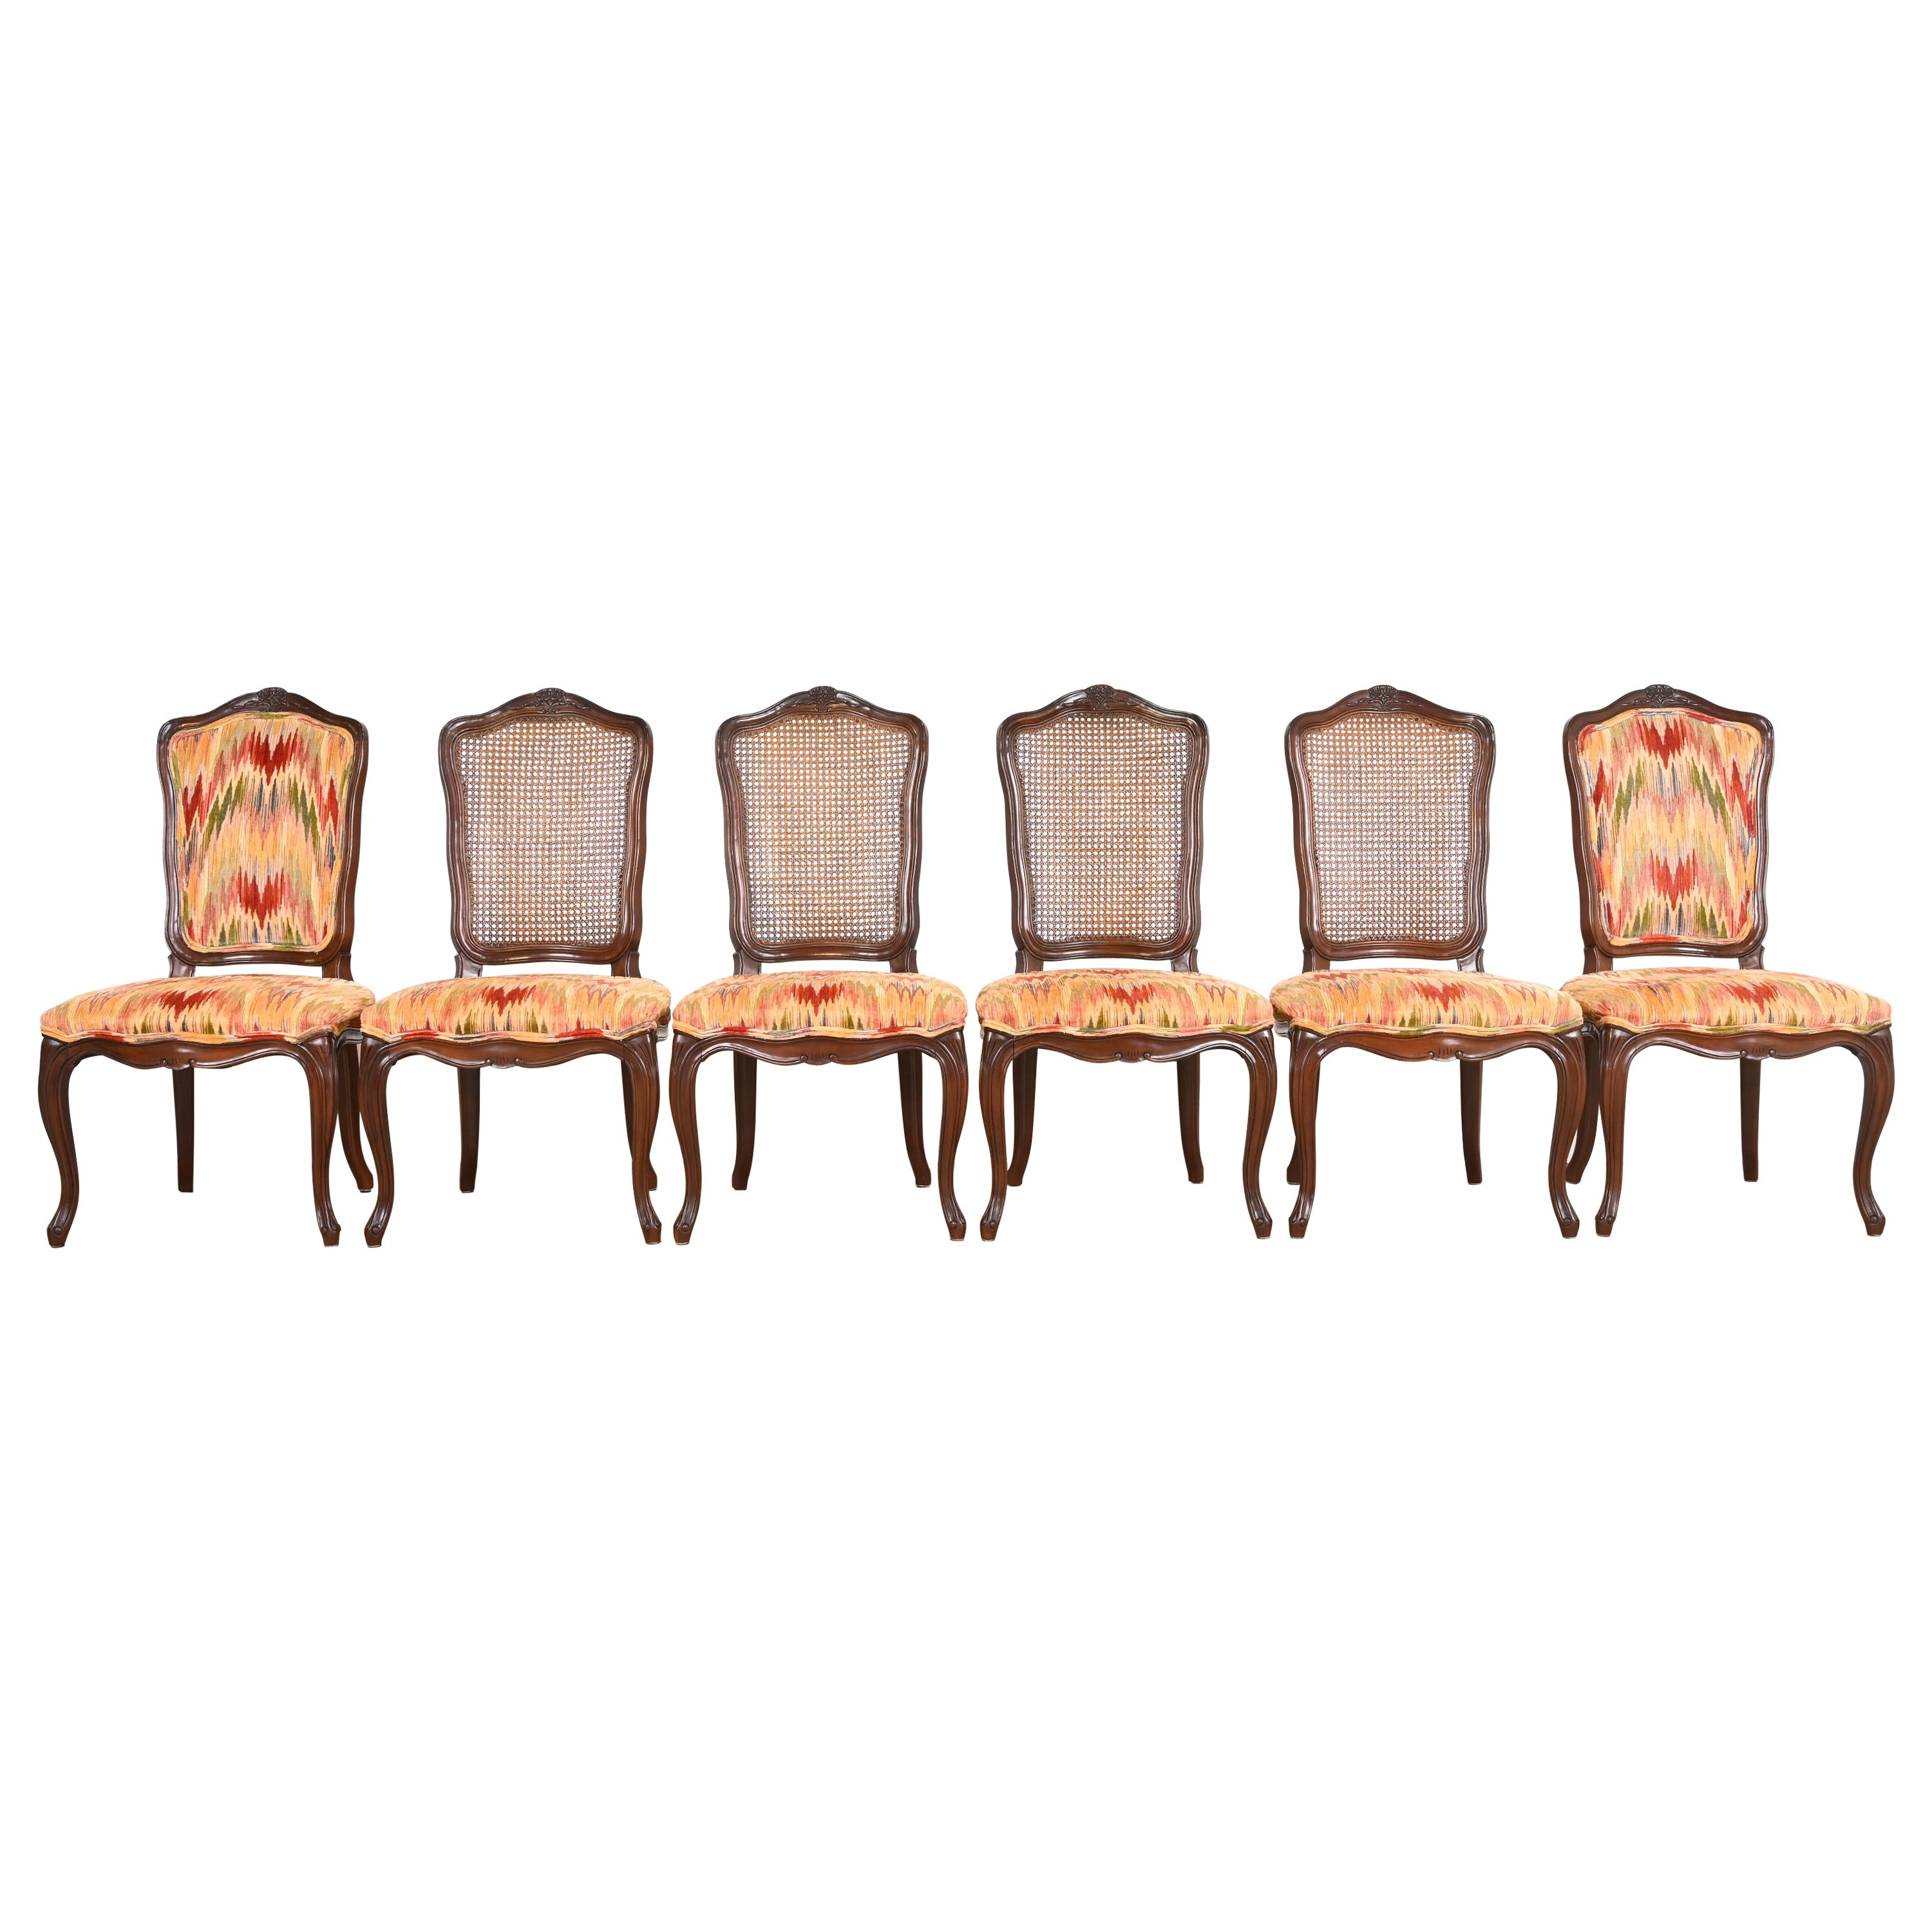 Kindel Furniture French Provincial Louis XV Walnut Cane Back Dining Chairs